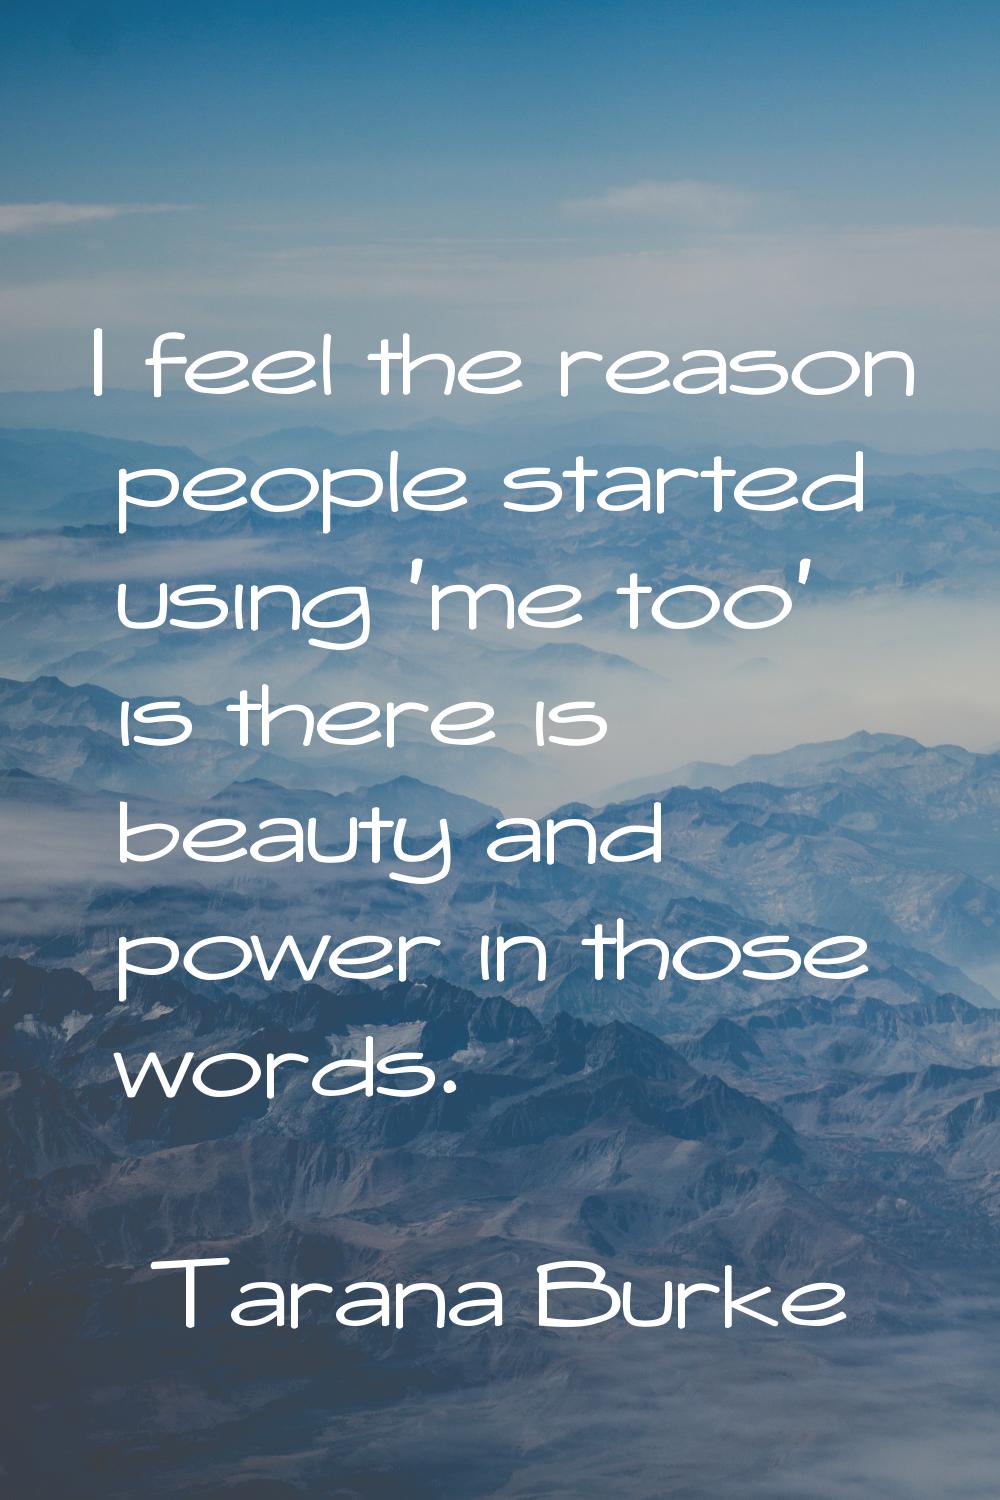 I feel the reason people started using 'me too' is there is beauty and power in those words.